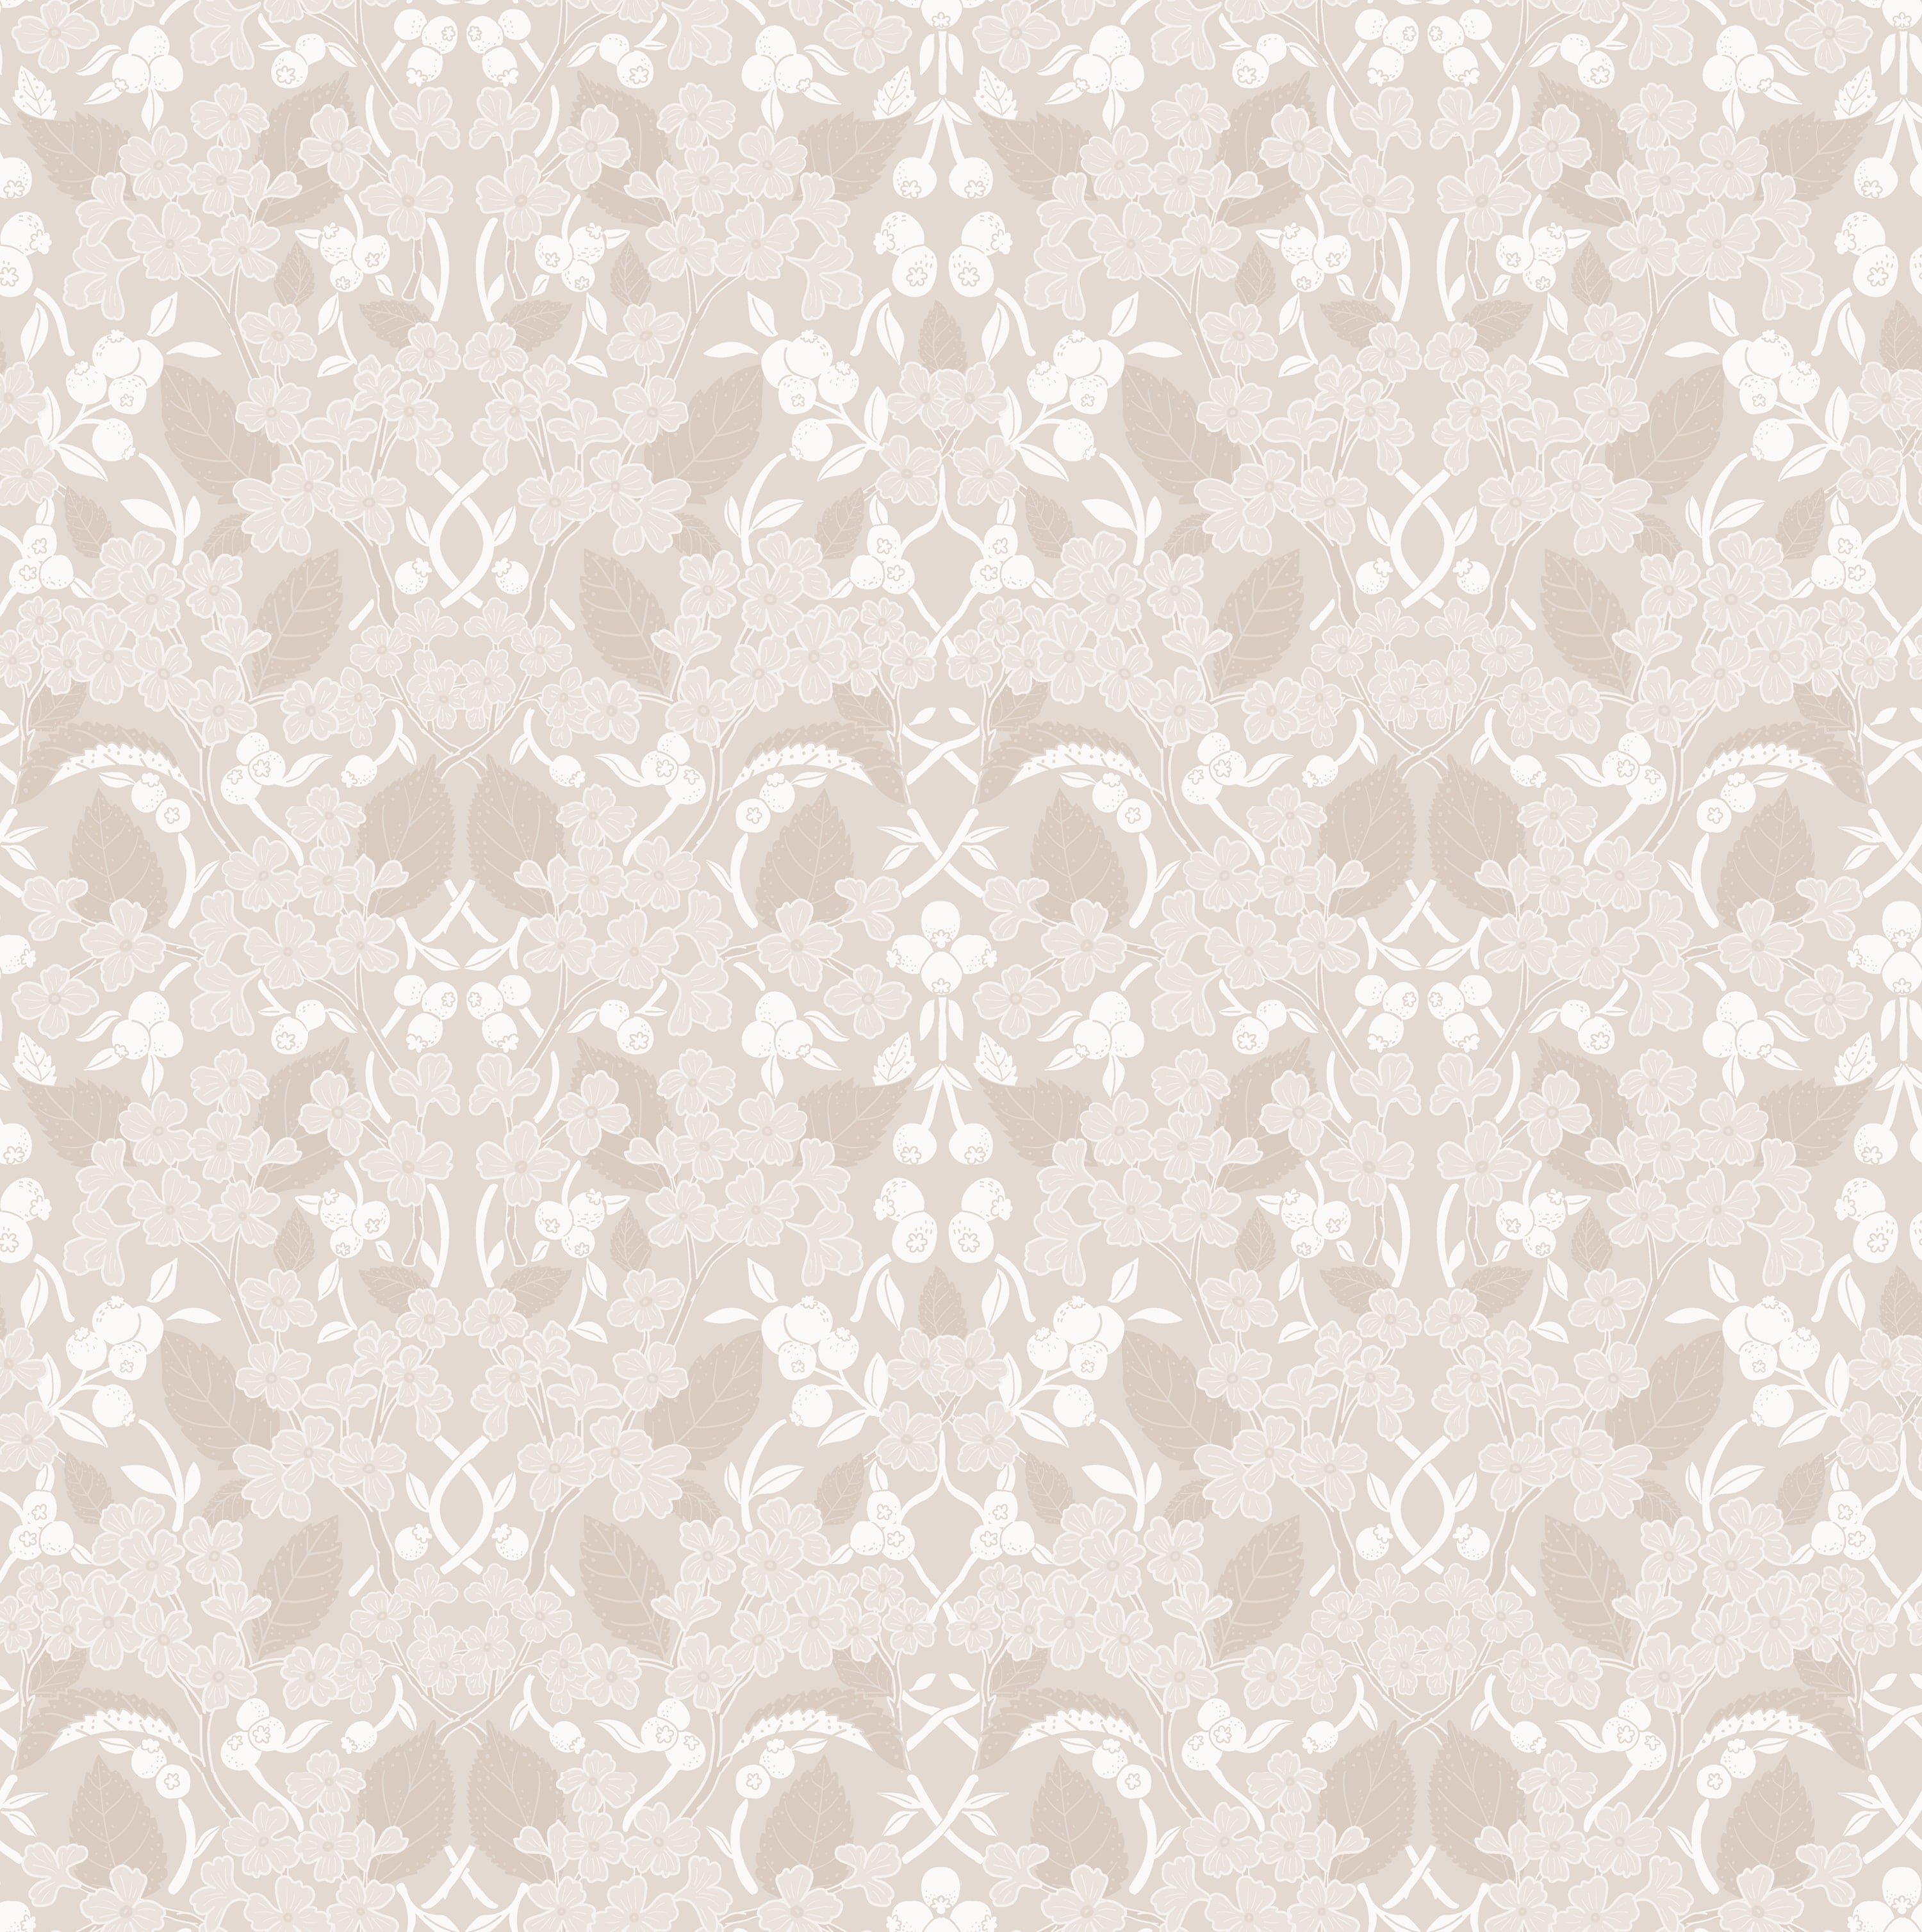 Close-up of the Linen Morris Wallpaper, showcasing its elegant floral and botanical motifs in soft beige and white hues. The design is intricate, adding a delicate and sophisticated touch to any wall it adorns